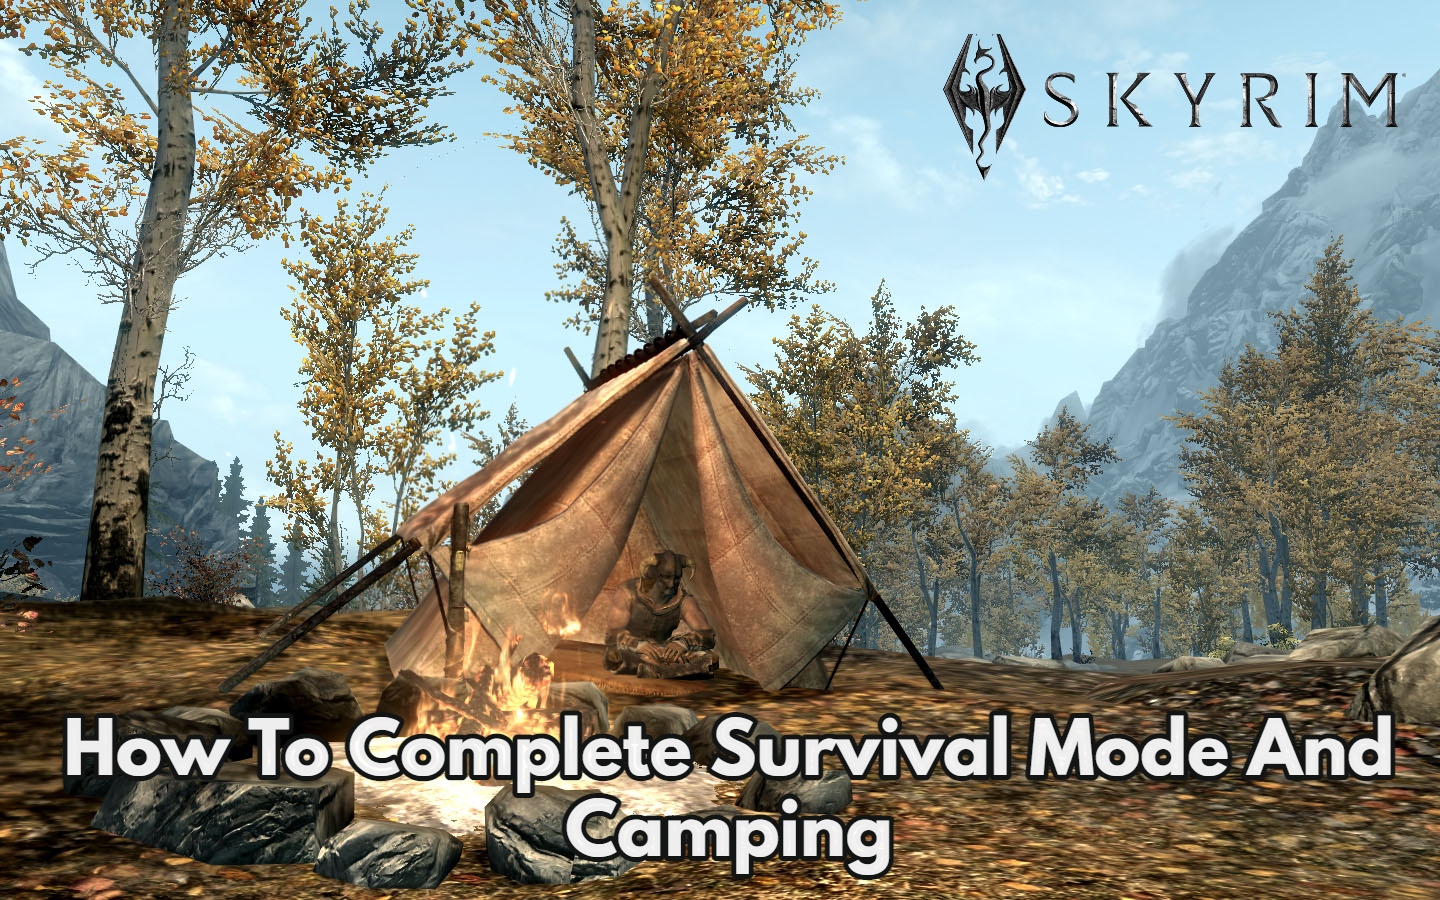 You are currently viewing Skyrim: How To Complete Survival Mode And Camping